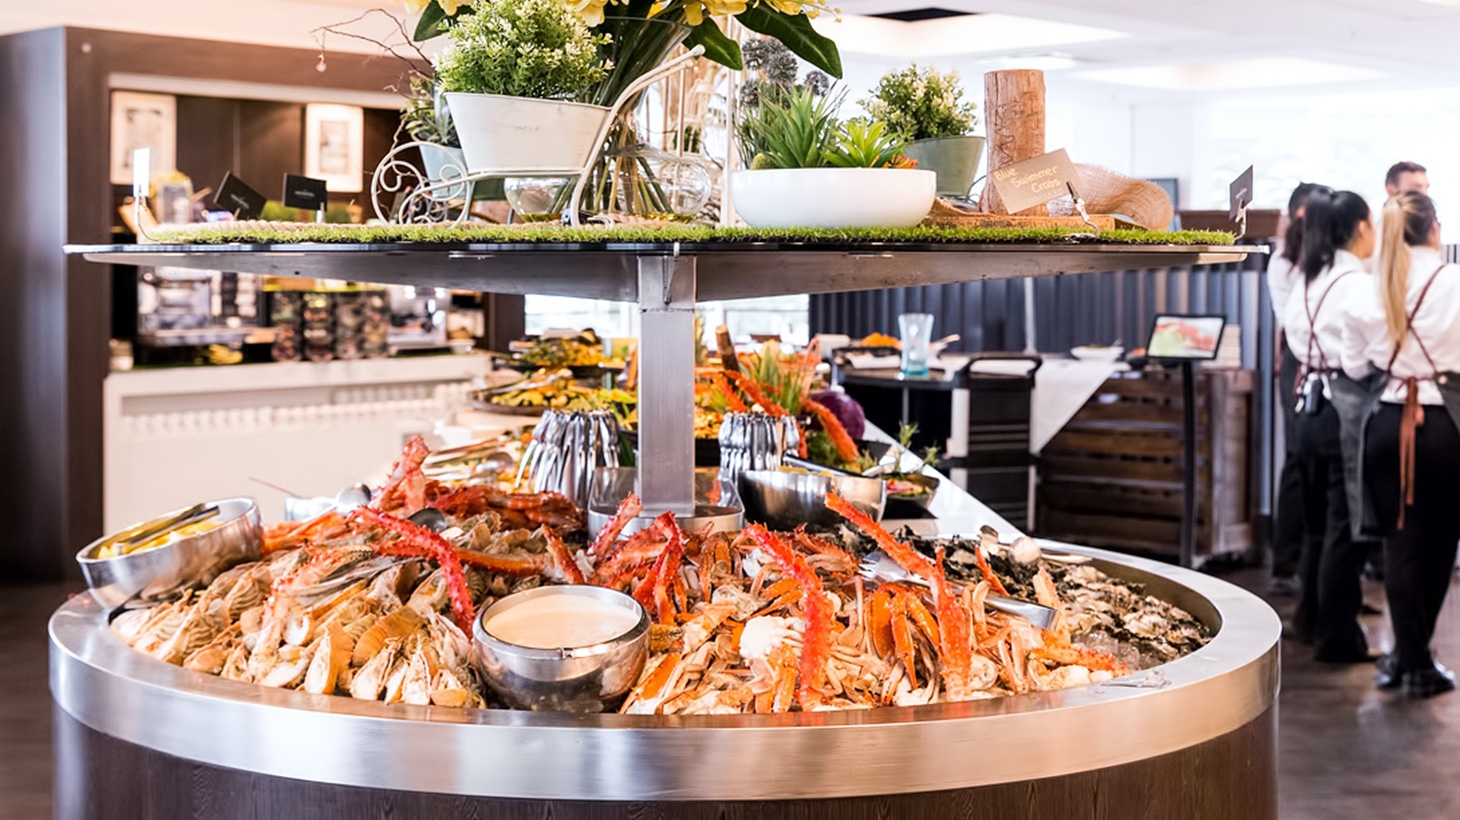 Seafood lovers rejoice with this all-you-can-eat seafood buffet experience ...